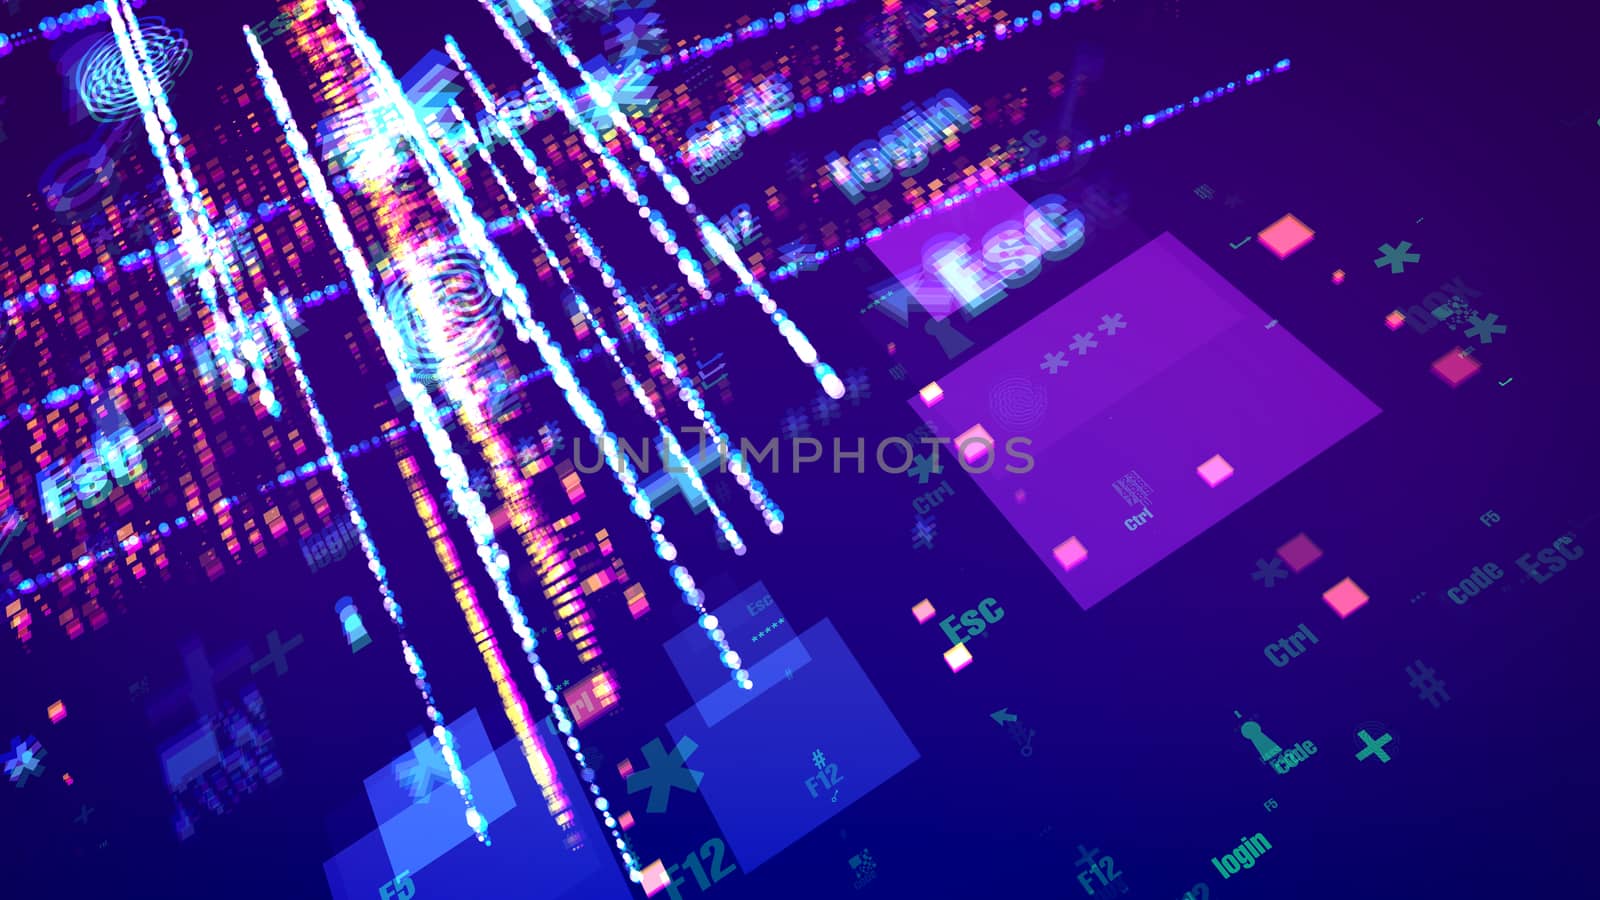 An amazing 3d illustration of cyber symbols such as number, grate, arrow, star, escape, square, flying cheerfully among lines of pink dots in the dark violet background